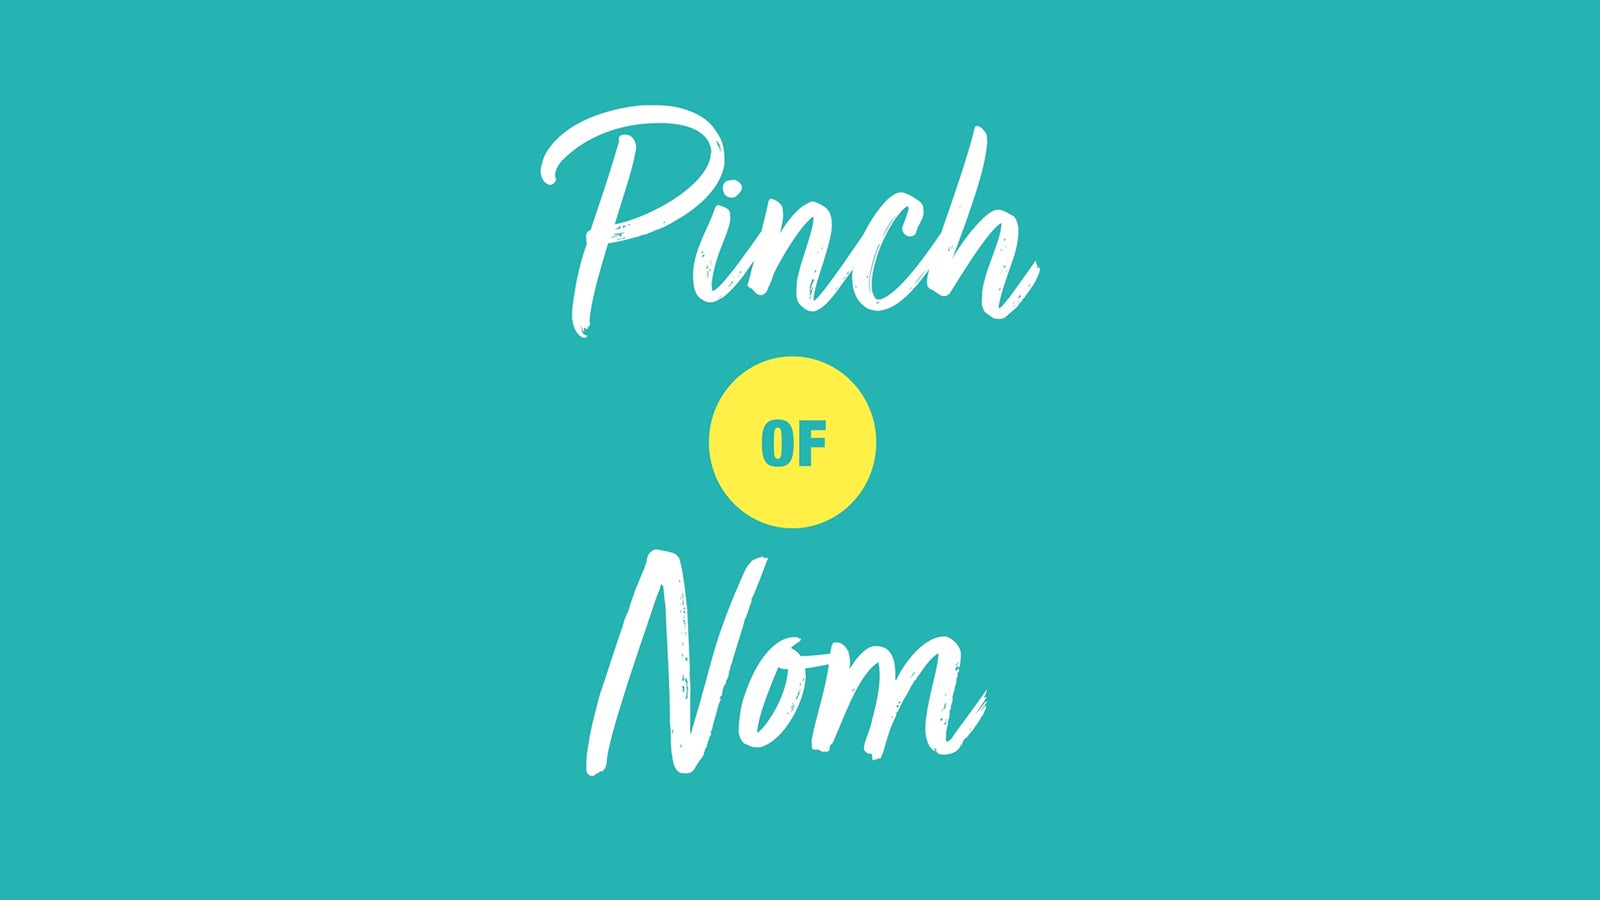 the Pinch of Nom logo on a green background